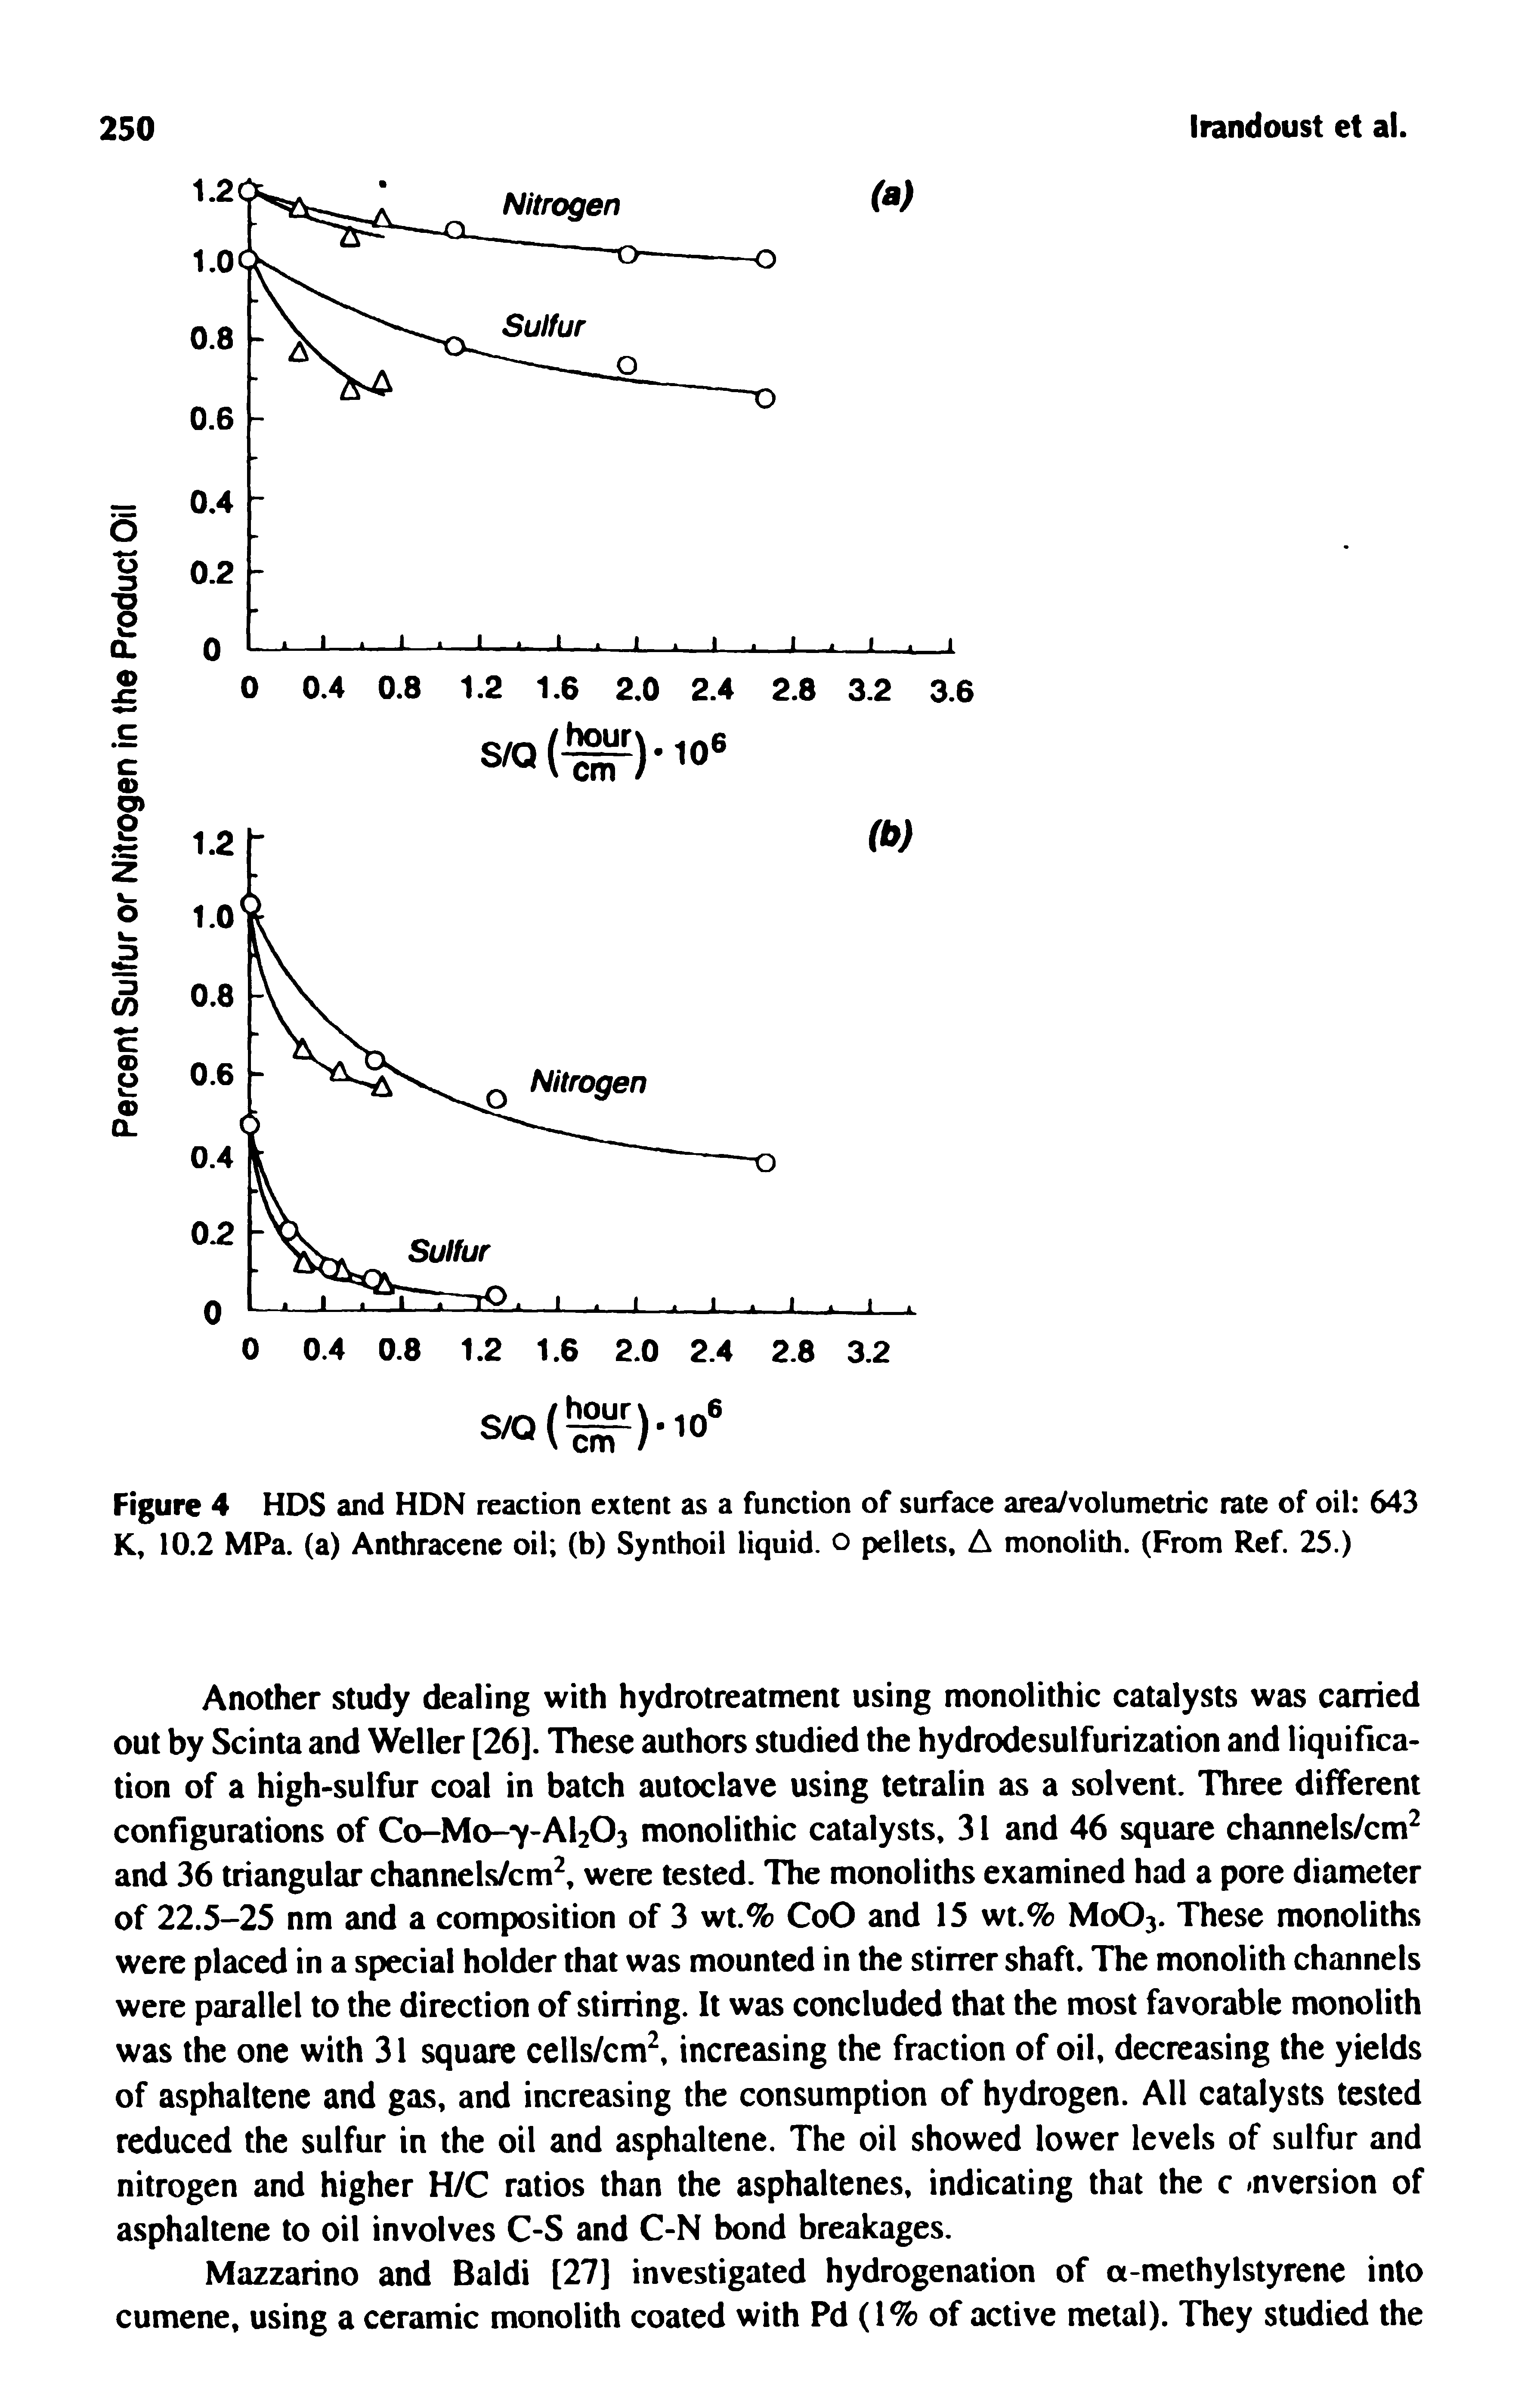 Figure 4 HDS and HDN reaction extent as a function of surface area/volumetric rate of oil 643 K, 10.2 MPa. (a) Anthracene oil (b) Synthoil liquid, o pellets, A monolith. (From Ref. 25.)...